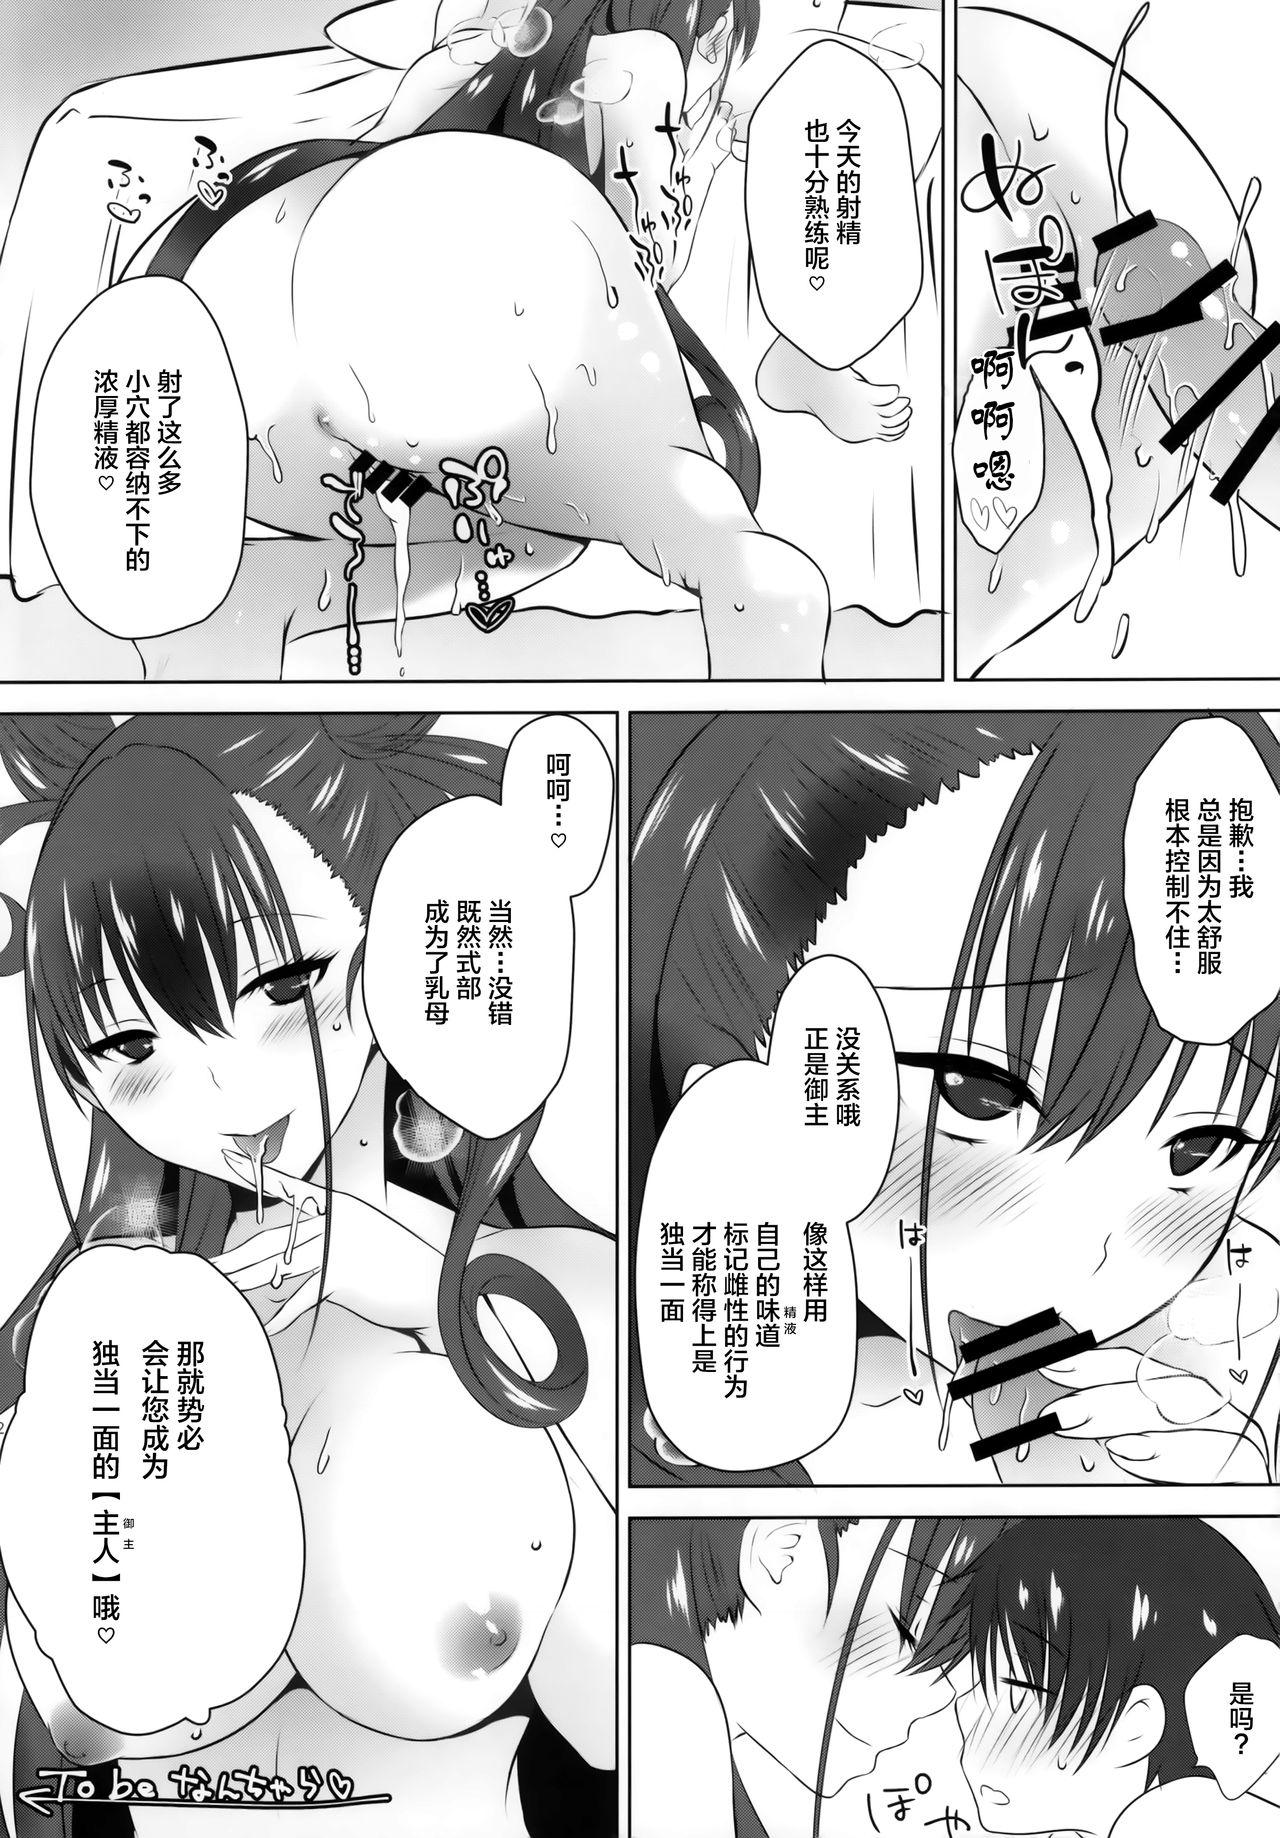 Anal Play 特上孕み二人前 - Fate grand order Tiny Tits Porn - Page 11